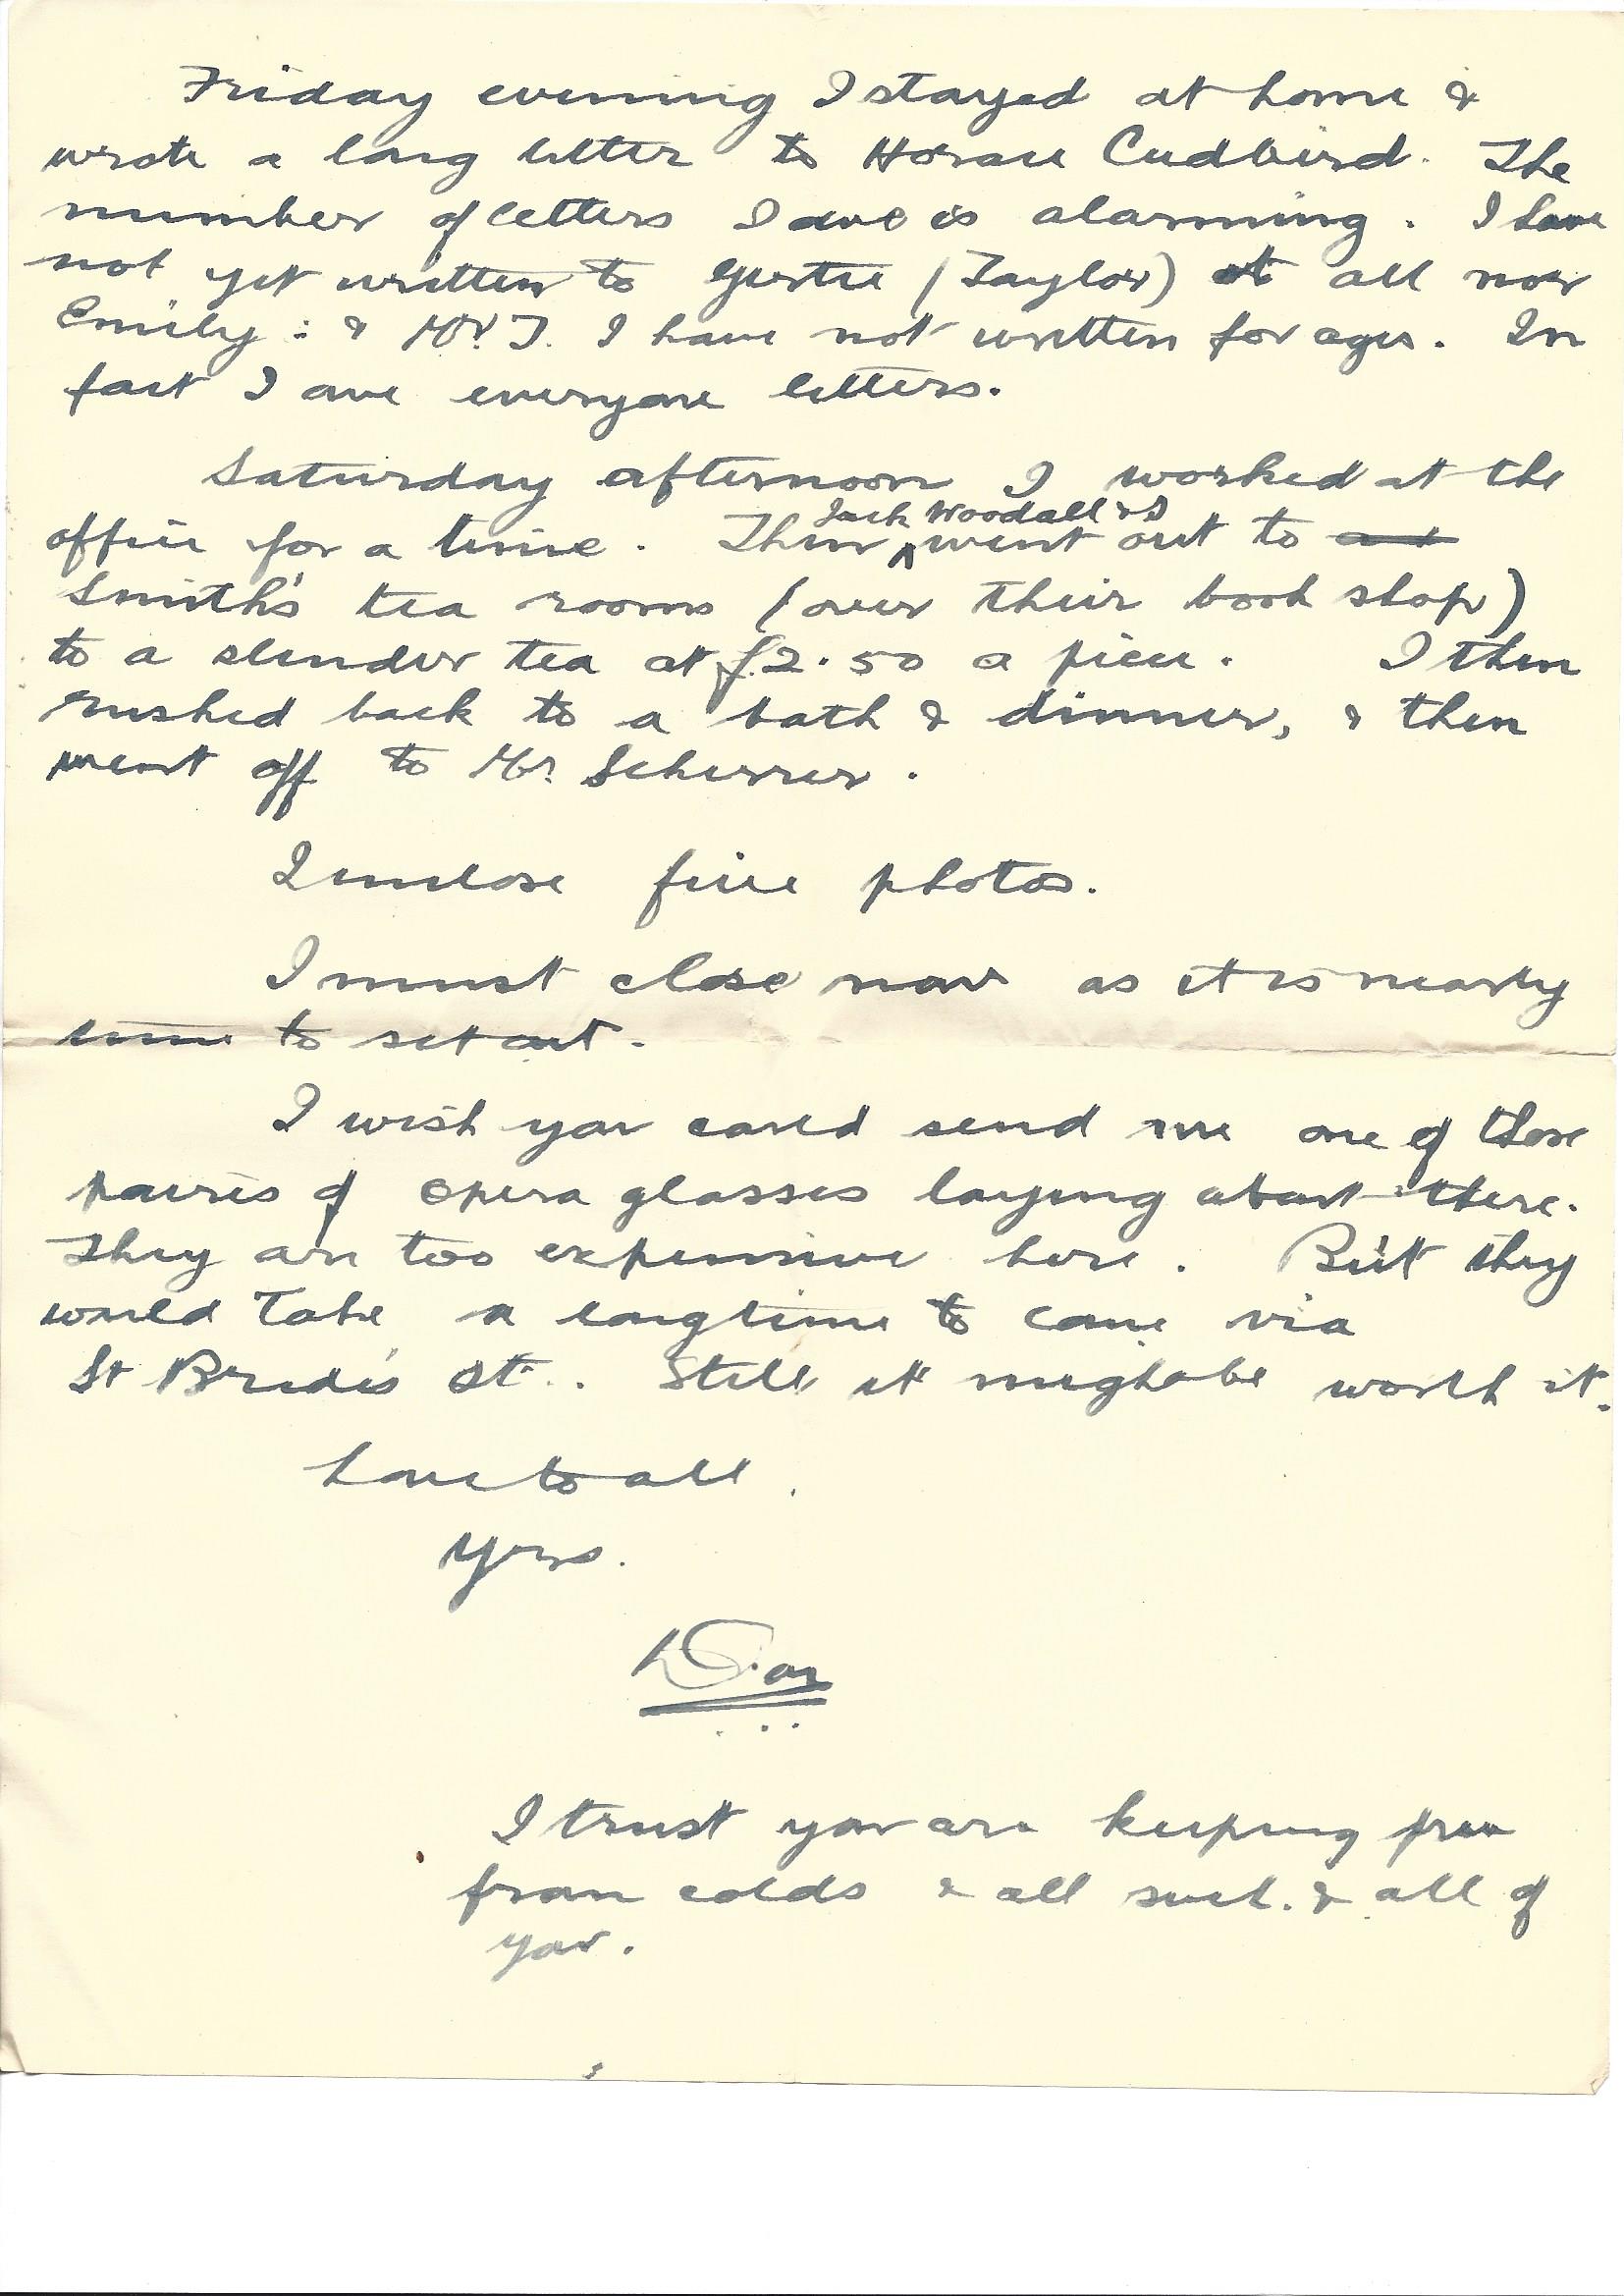 1919-10-26 Page 2 letter by Donald Bearman